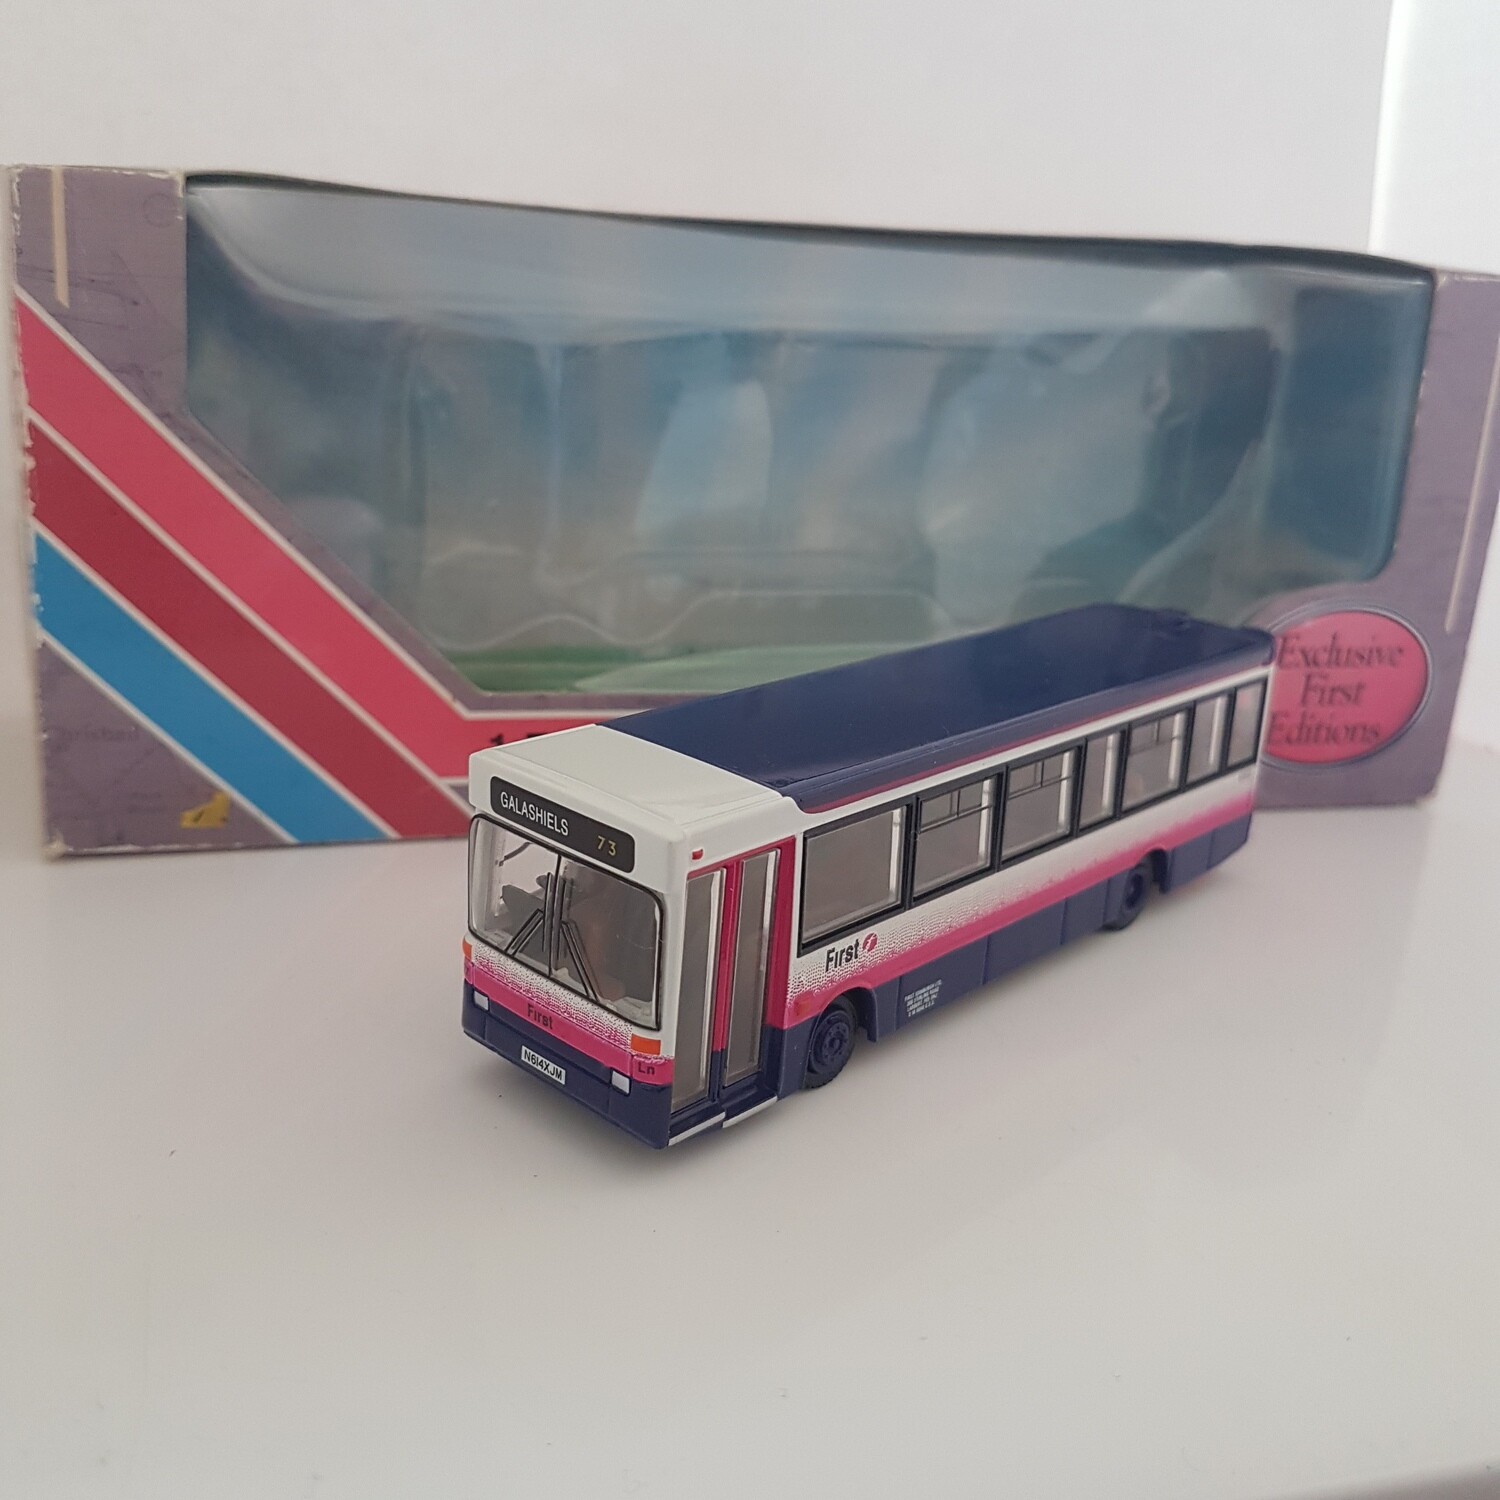 Extremely Rare EFE Plaxton Pointer Dart Bus - Scale 1/76 (Bus270)